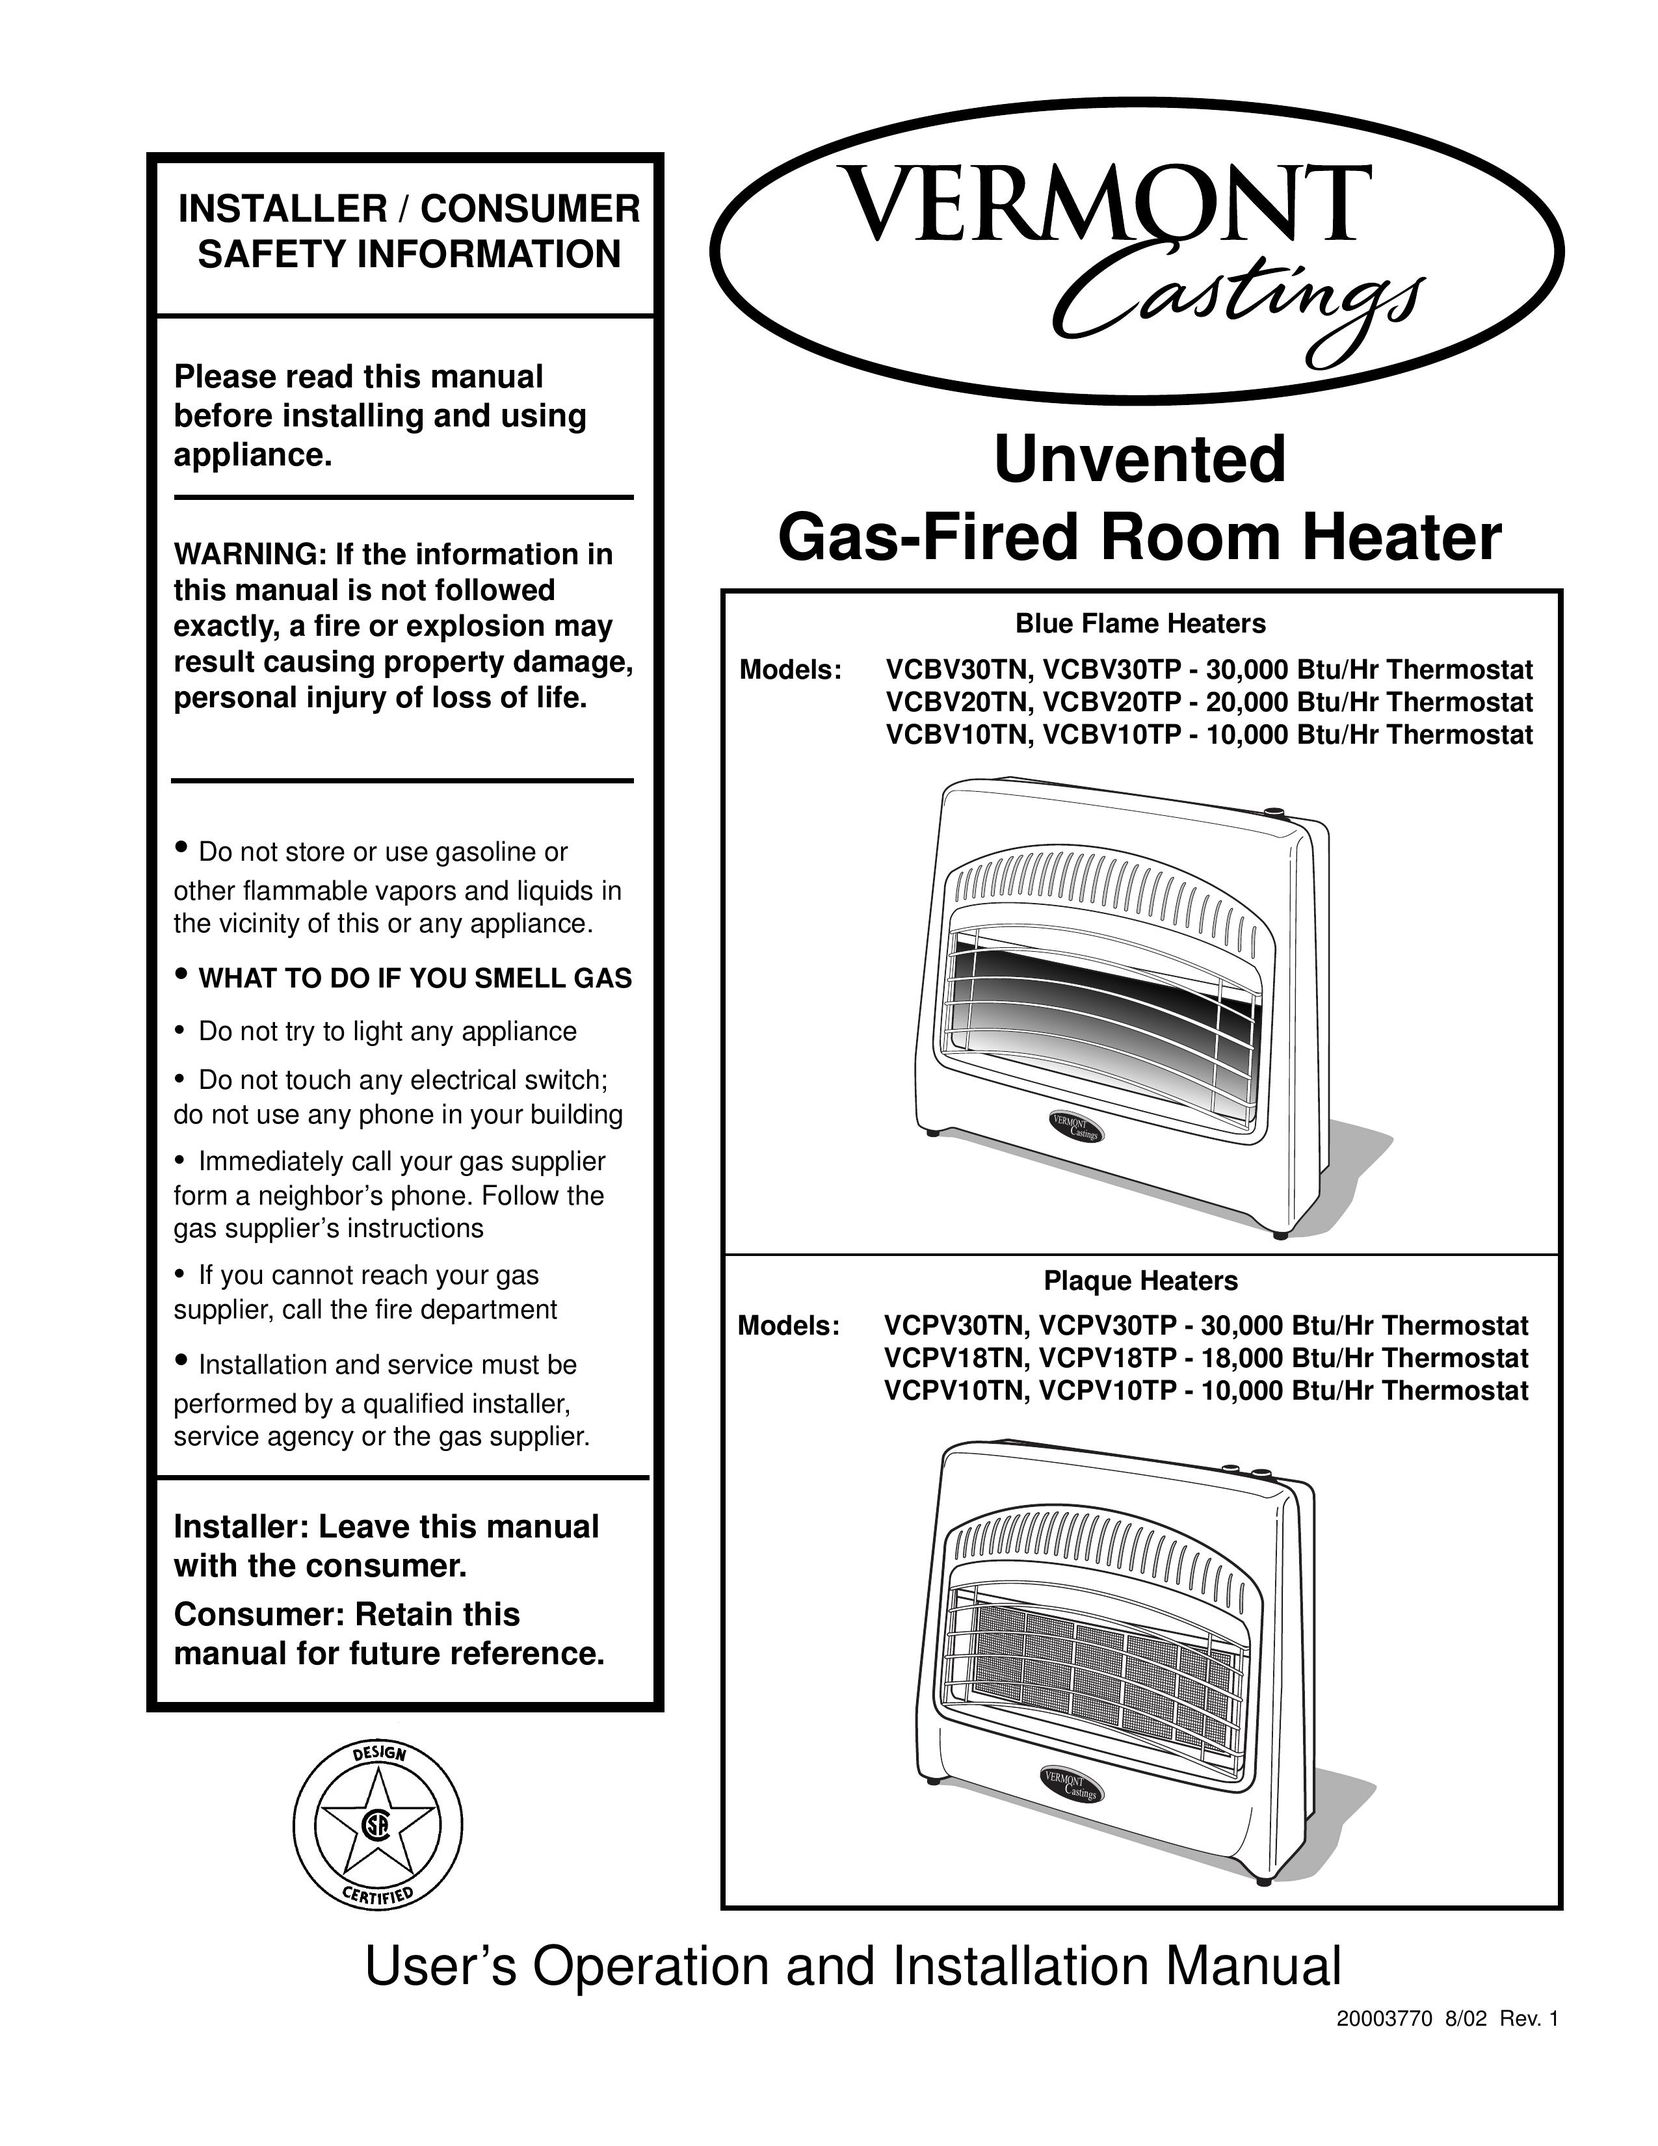 Vermont Casting VCPV18TN Gas Heater User Manual